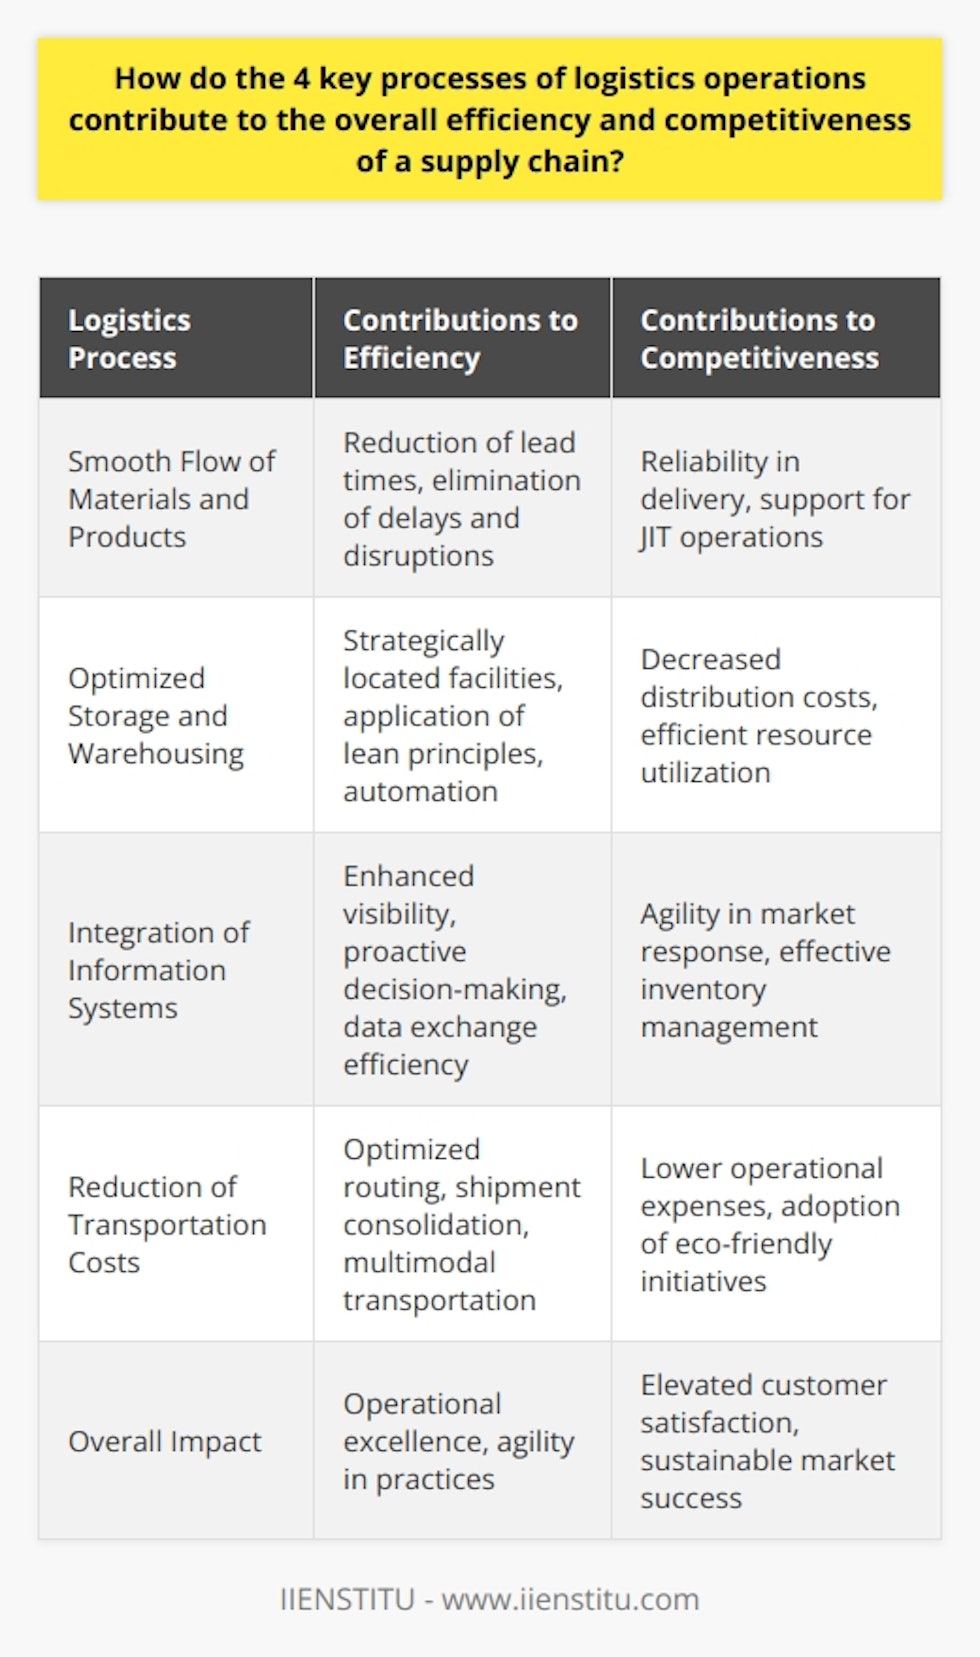 Efficient logistics operations are the backbone of a dynamic supply chain. They ensure that products reach consumers expeditiously and cost-effectively, creating a competitive edge in the marketplace. Here, the four key processes—smooth flow of materials and products, optimized storage and warehousing, integration of information systems, and reduction of transportation costs—each play a pivotal role in enhancing supply chain efficiency and competitiveness.1. Smooth Flow of Materials and Products: One of the primary functions of logistics is to manage the transportation of materials from suppliers to the production facility and then on to the end customer. Seamless logistics operations eliminate unnecessary delays and disruptions. This orchestration is achieved through precise coordination with suppliers, accurate forecasting, reliable transportation networks, and synchronized demand planning, leading to a substantial decrease in lead times and enhanced reliability in product delivery. These factors are critical, especially for industries operating on just-in-time (JIT) principles.2. Optimized Storage and Warehousing: The positioning and management of storage facilities influence the efficiency of a supply chain significantly. Strategic location selection reduces the time and cost associated with moving goods to the final consumers. Applying lean management principles to warehousing can minimize waste and maximize value, making sure that resources are used prudently. The shift towards automation and the implementation of Warehouse Management Systems (WMS) not only accelerates inventory control but also improves accuracy in order management and reduces labor costs.3. Integration of Information Systems: The lifeblood of a competitive supply chain is information. Enhanced visibility across all stages of the supply chain enabled by integrated information systems aids in proactive decision-making. These systems, which include Enterprise Resource Planning (ERP) and Supply Chain Management (SCM) software, facilitate the exchange of data between different stakeholders, offering insights that lead to effective inventory management, decreased out-of-stock scenarios, and agile reactions to market shifts. Such integration is paramount in an increasingly digital world where big data and predictive analytics play crucial roles.4. Reduction of Transportation Costs: Transportation is typically one of the most substantial costs within logistics operations. Strategies that companies employ to reduce these costs include optimizing routing, combining shipments through consolidation, employing multimodal transportation methods, and negotiating better carrier rates. Moreover, eco-friendly logistics strategies such as green logistics programs not only cut down on emissions but often lead to cost savings, as they focus on fuel efficiency and waste reduction.In essence, the interplay of these four logistical processes forms a robust supply chain framework that drives operational excellence. The agility provided through these logistics practices allows firms to adapt to market volatility, meet customer demands proficiently, and maintain a lean operational model ultimately leading to elevated levels of supply chain competitiveness and customer satisfaction. Companies that understand and master these logistics operations, such as IIENSTITU, position themselves to outperform their competitors and achieve sustainable success in their respective markets.